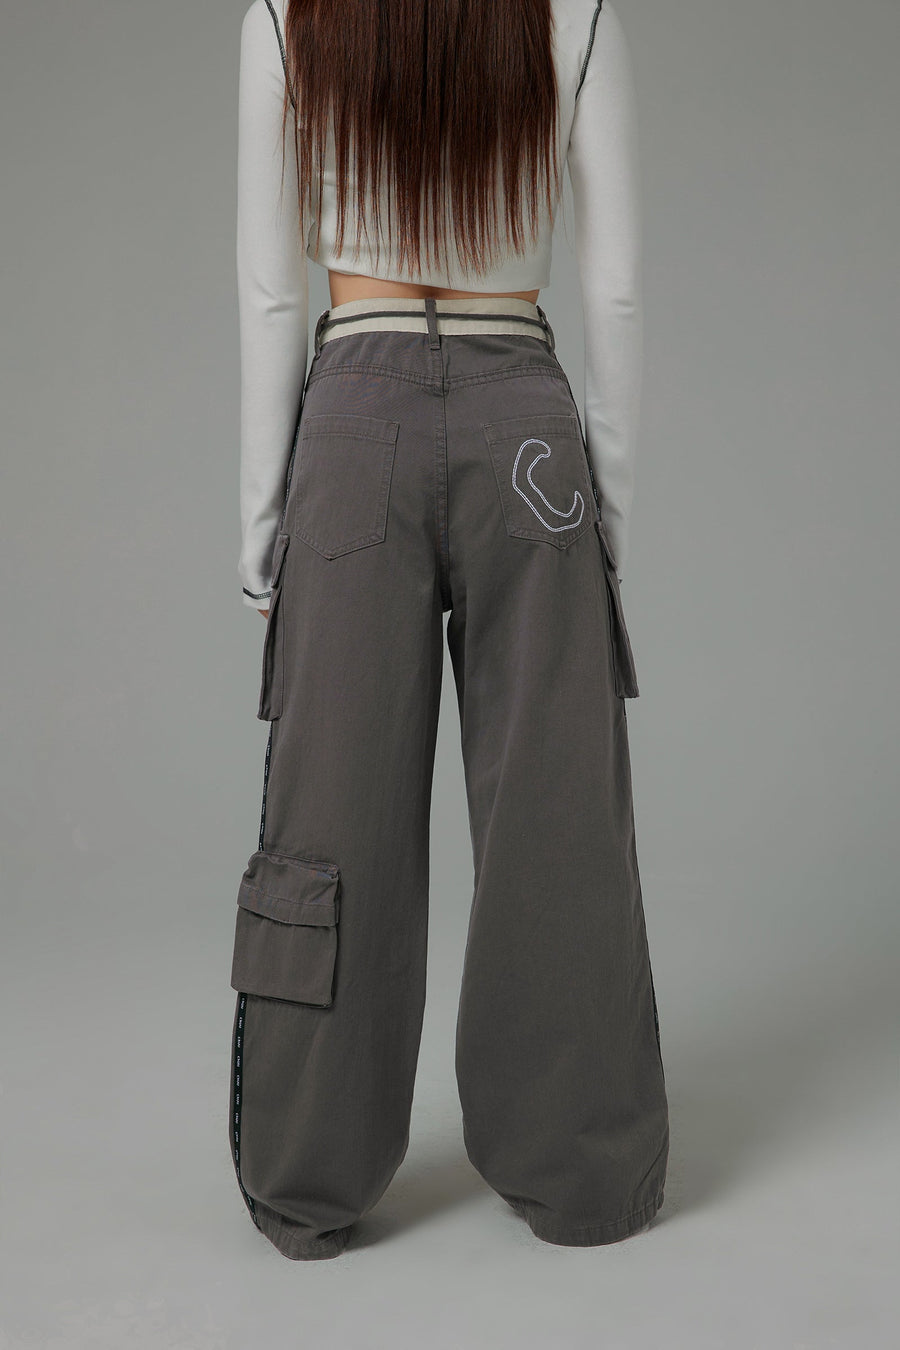 CHUU String Belted Cargo Pants